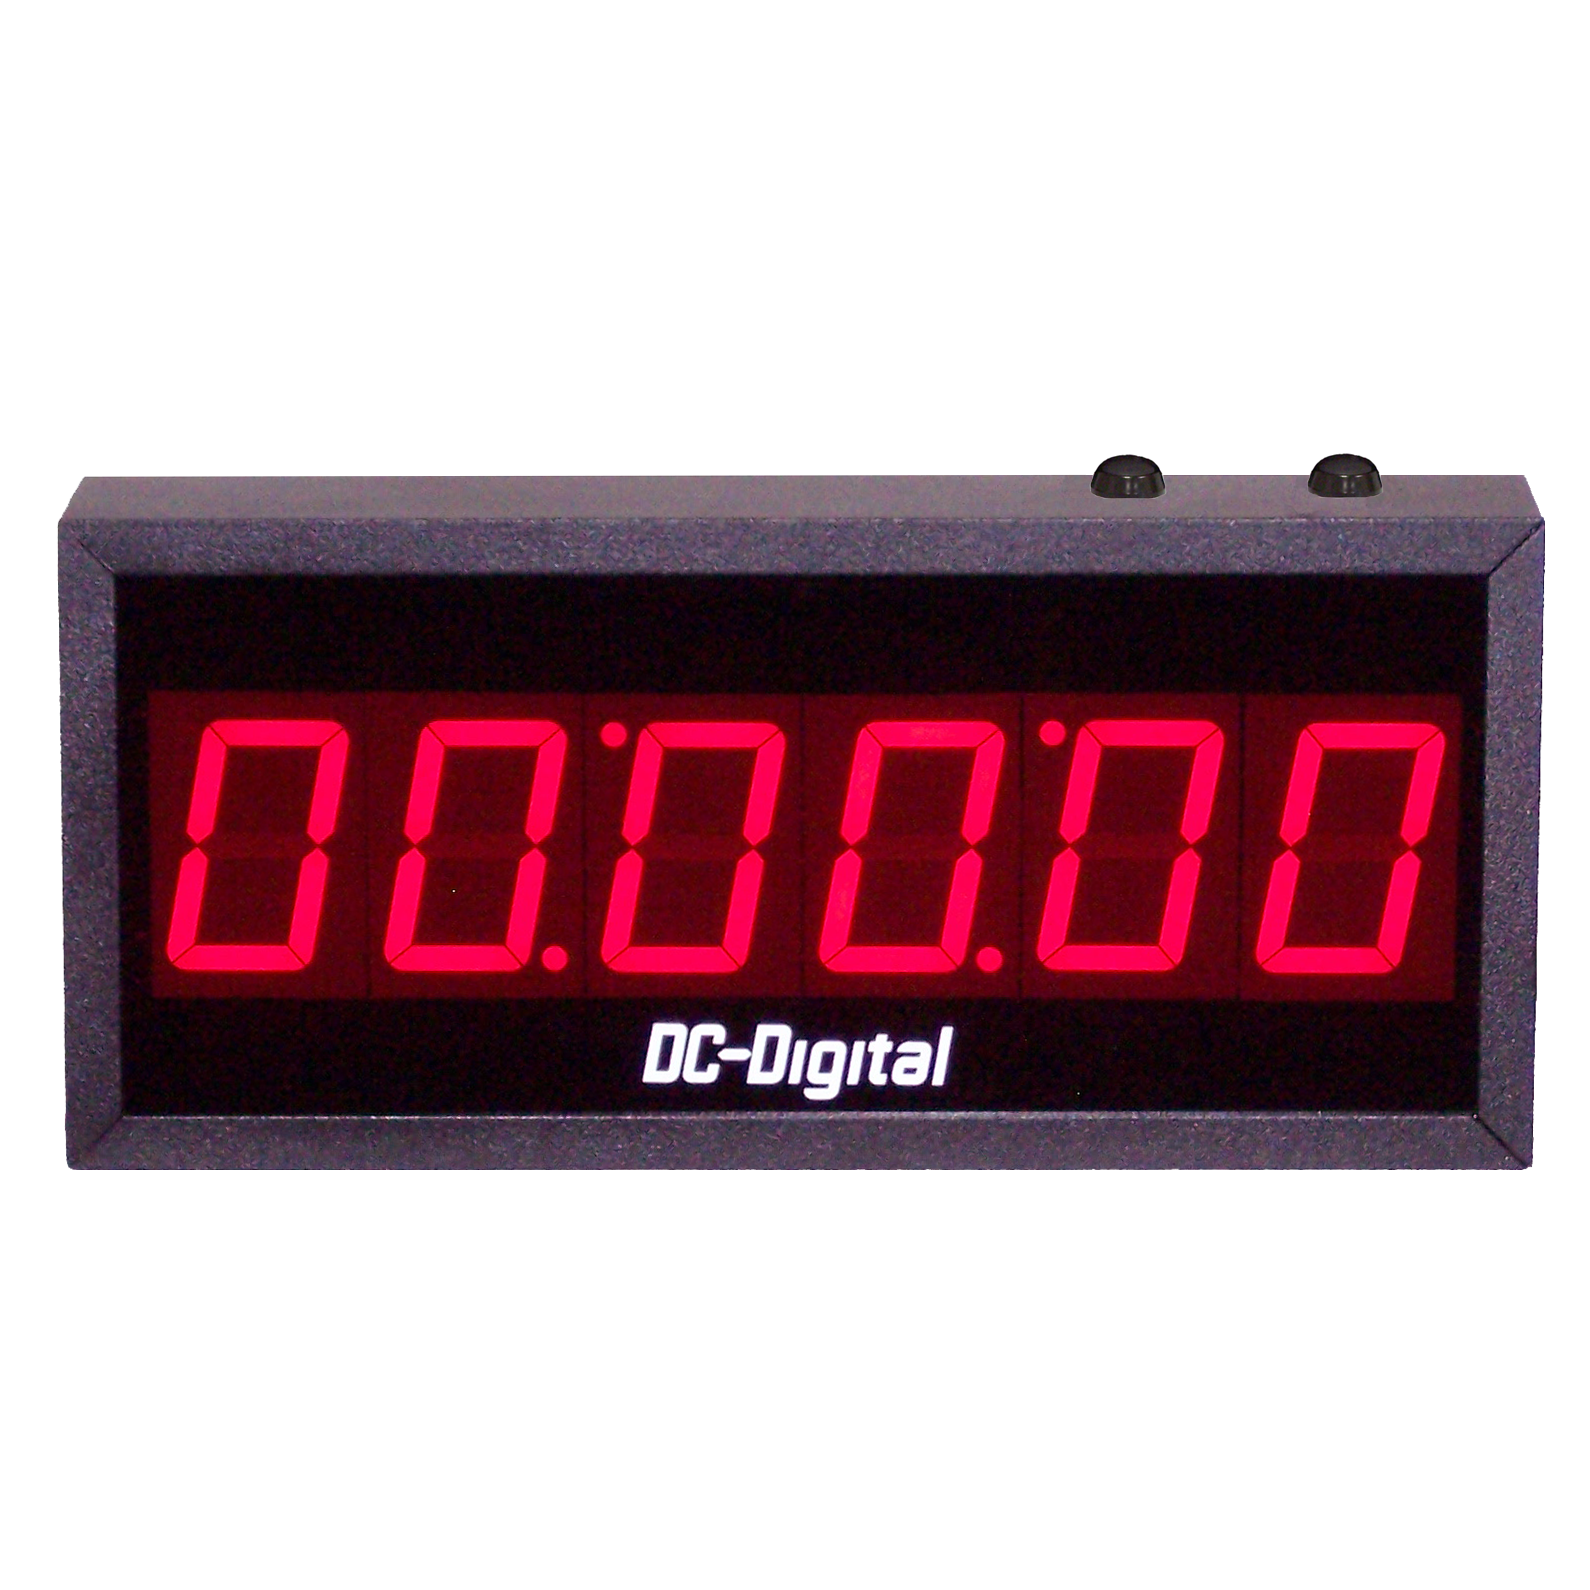 (DC-256T-UP) Push-Button Controlled, Digital Count Up Timer-Clock, 2.3 Inch Digits ...